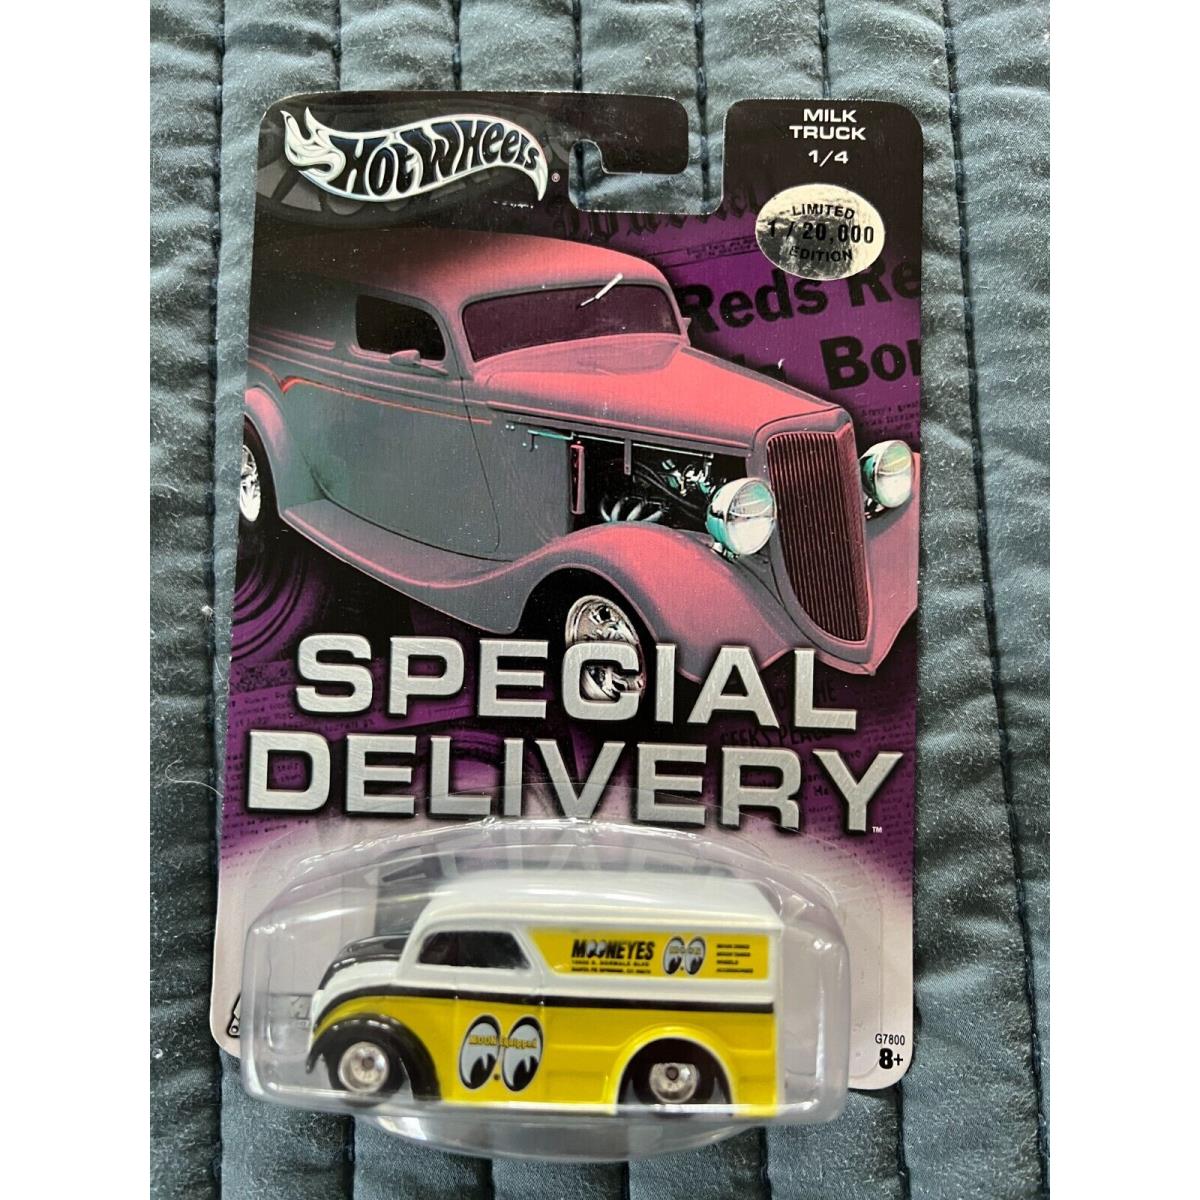 Hot Wheels Special Delivery Milk Truck 1/4 Mooneyes Dairy Delivery Limited